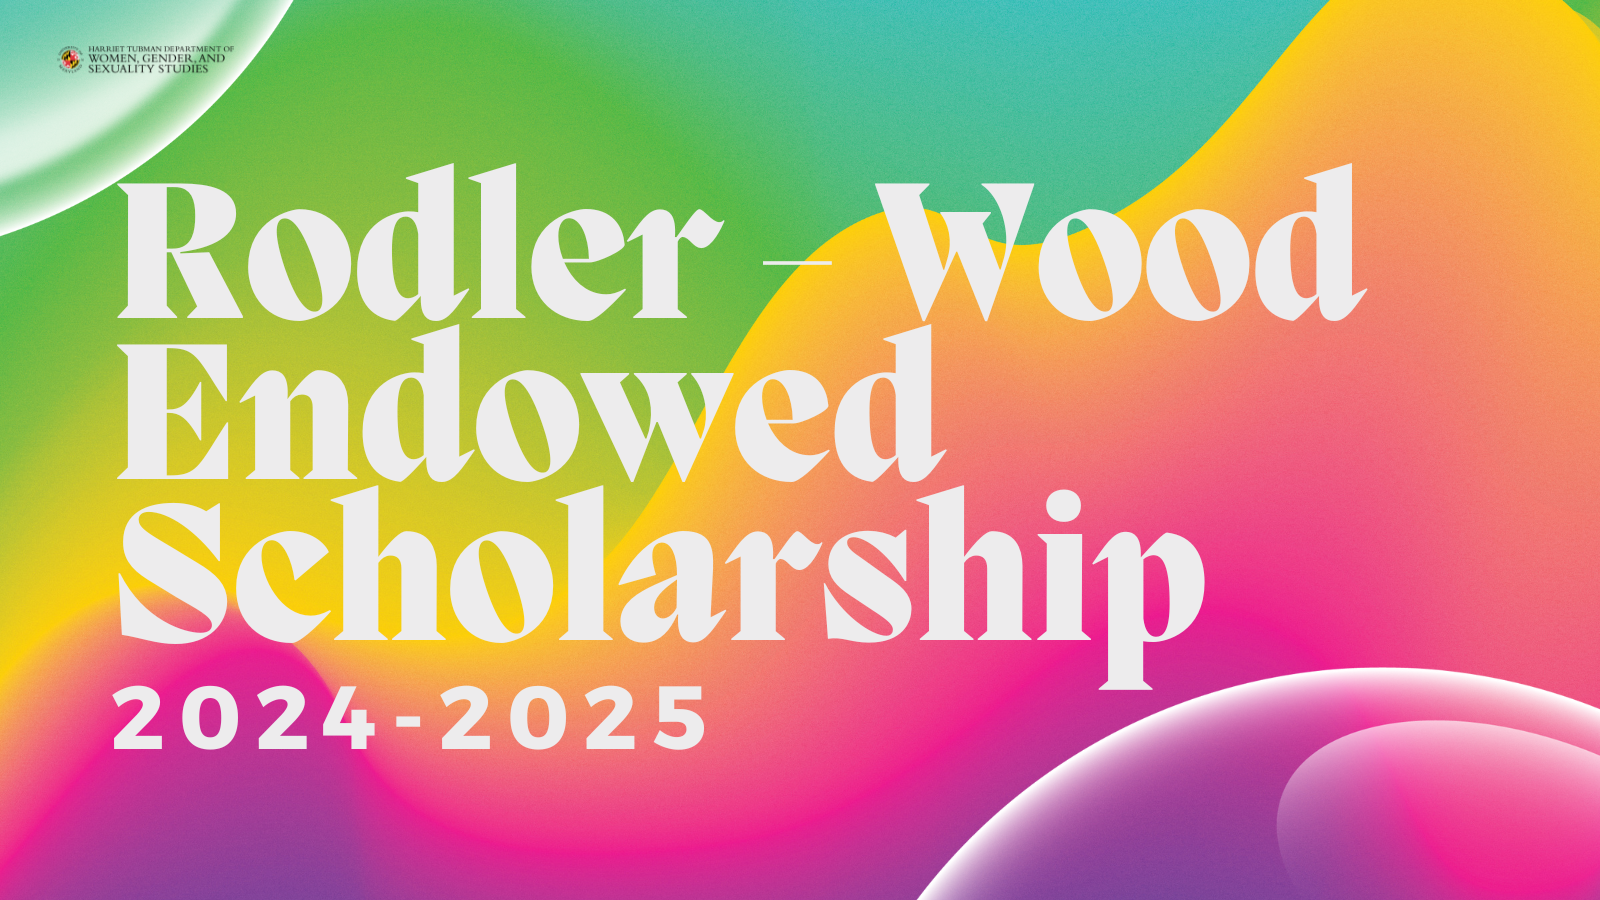 A rainbow background with white lettering for the Rodler-Wood Endowed Scholarship